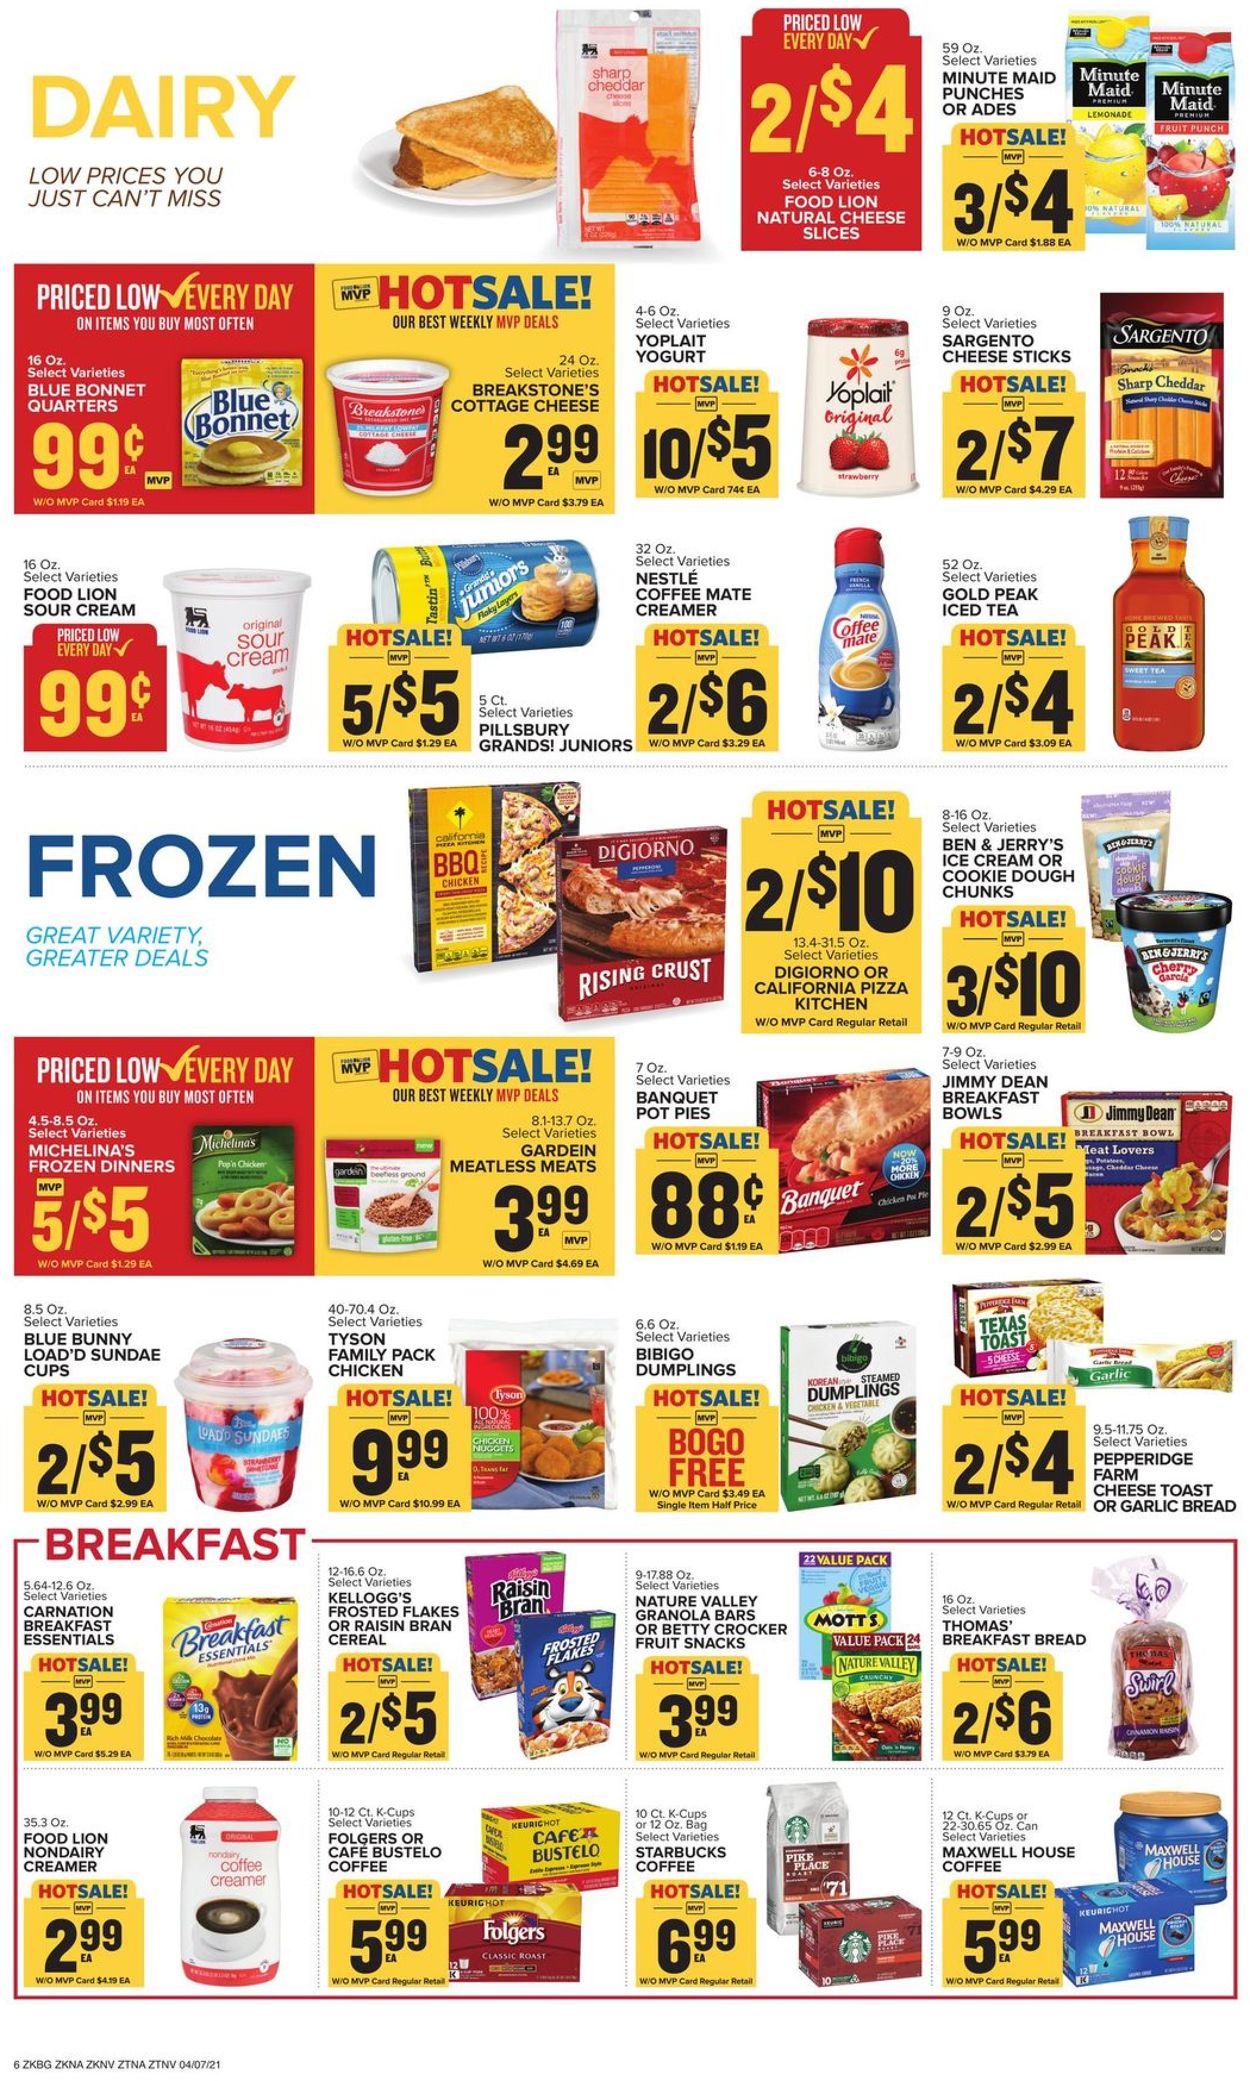 Food Lion Current weekly ad 04/07 04/13/2021 [9]